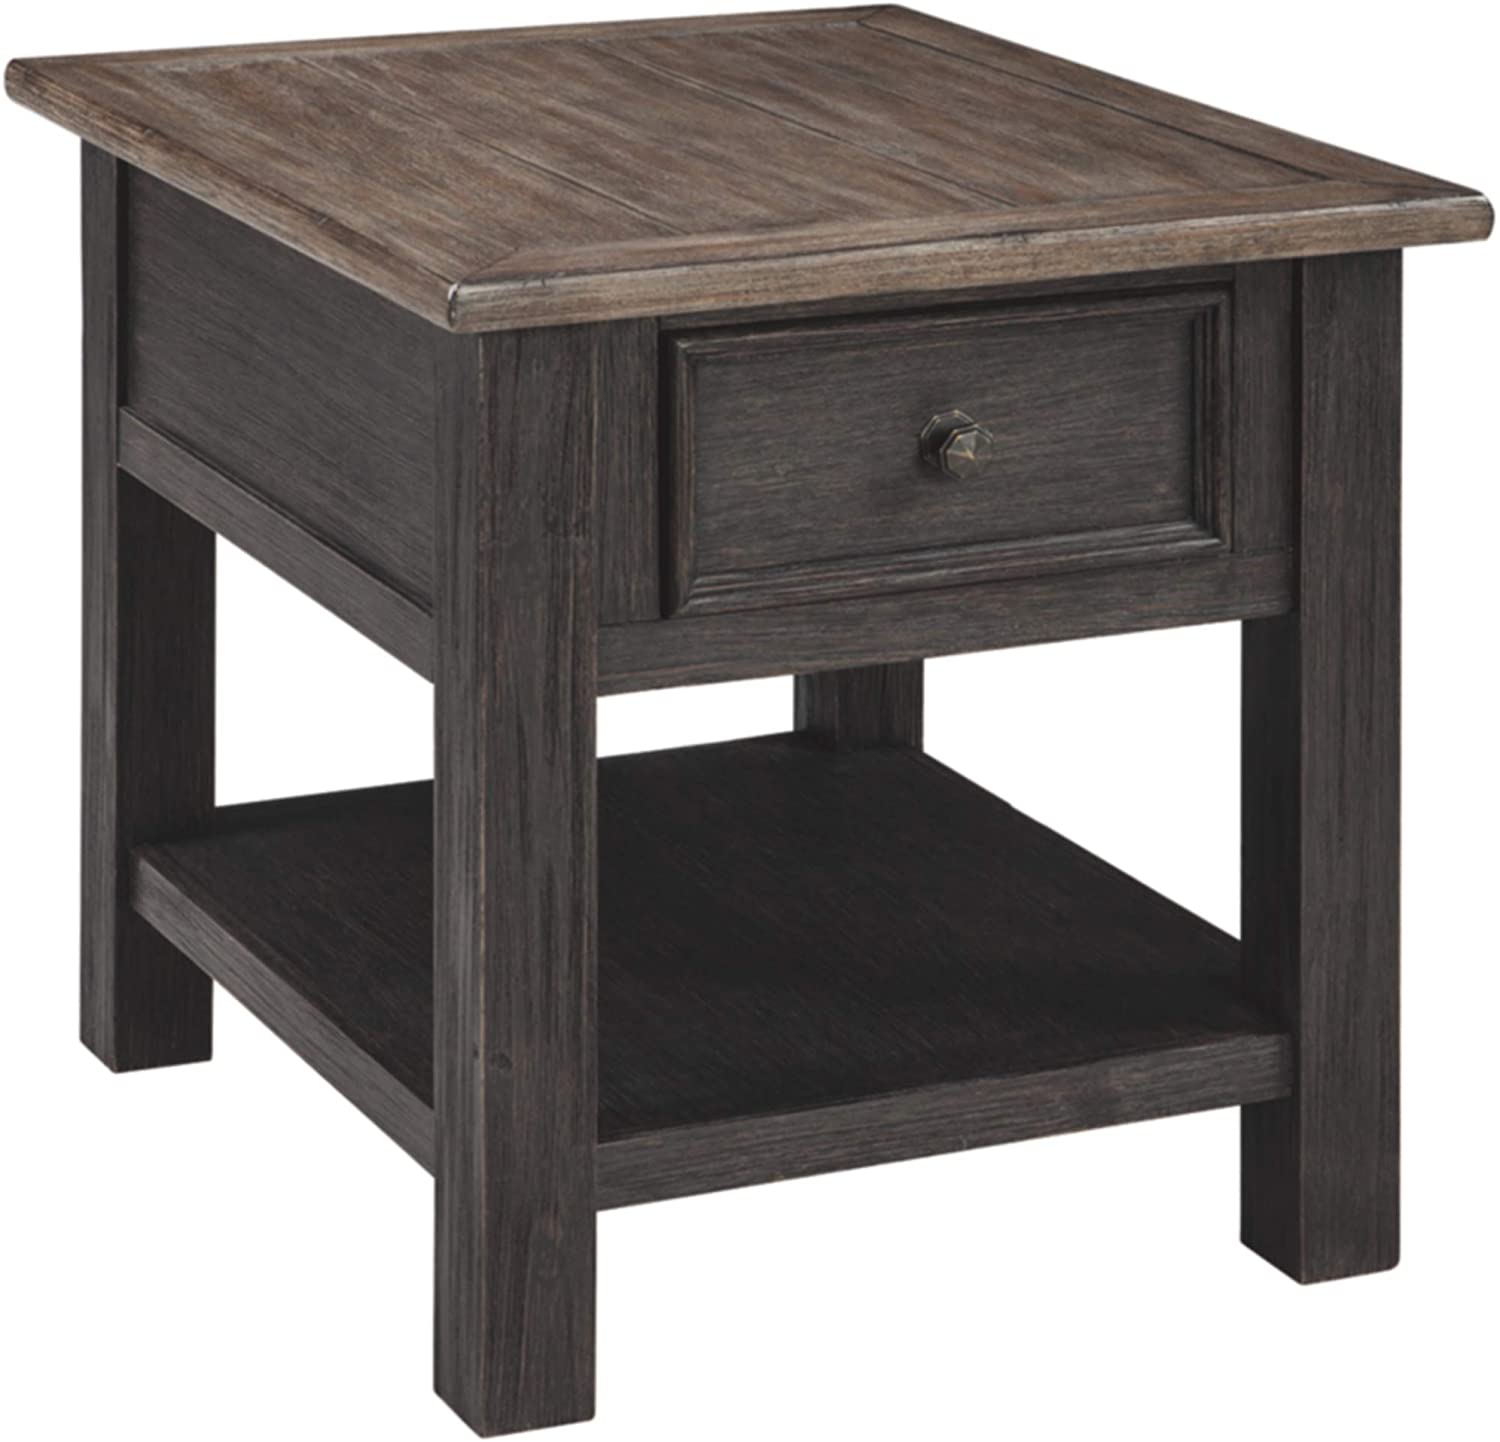 Signature Design By Ashley Tyler Creek Farmhouse Living Room End Table